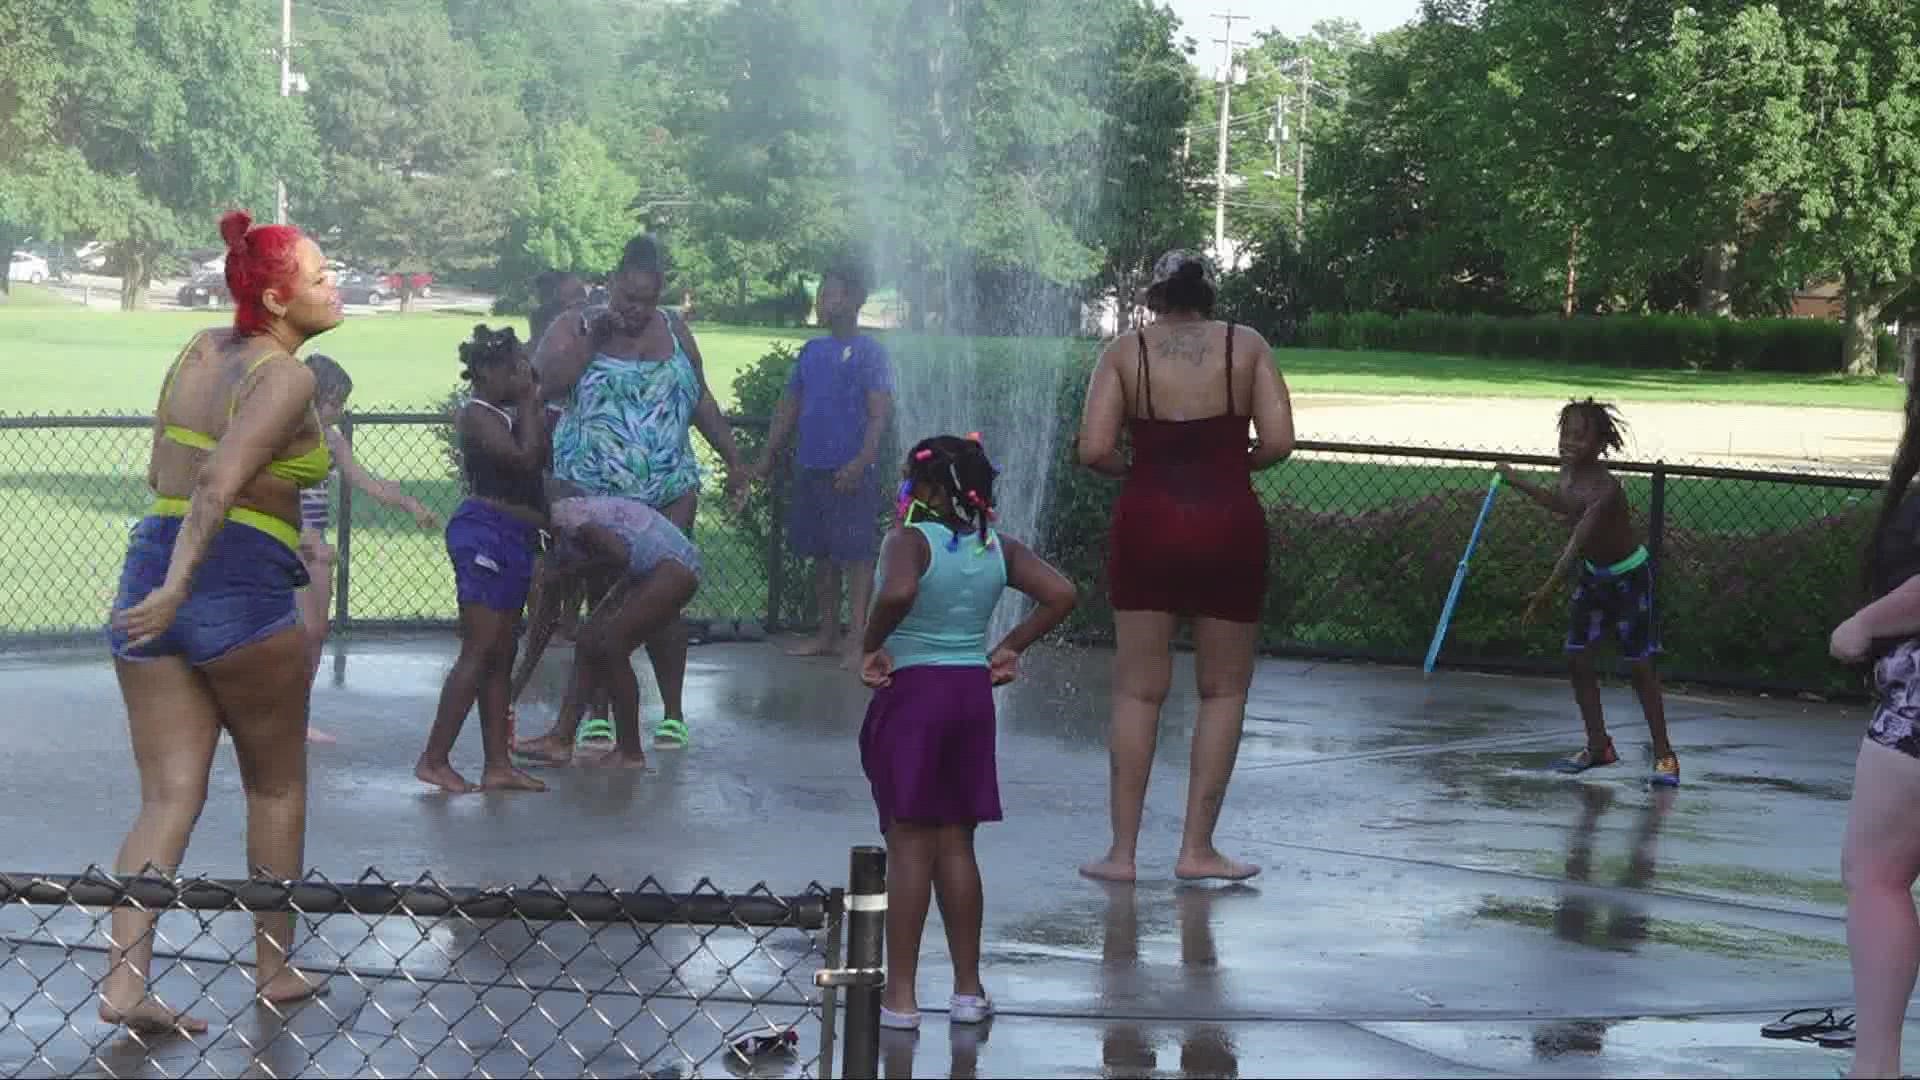 It's going to be another hot day across Northeast Ohio, so you can expect a busy day at pools and beaches within the community.